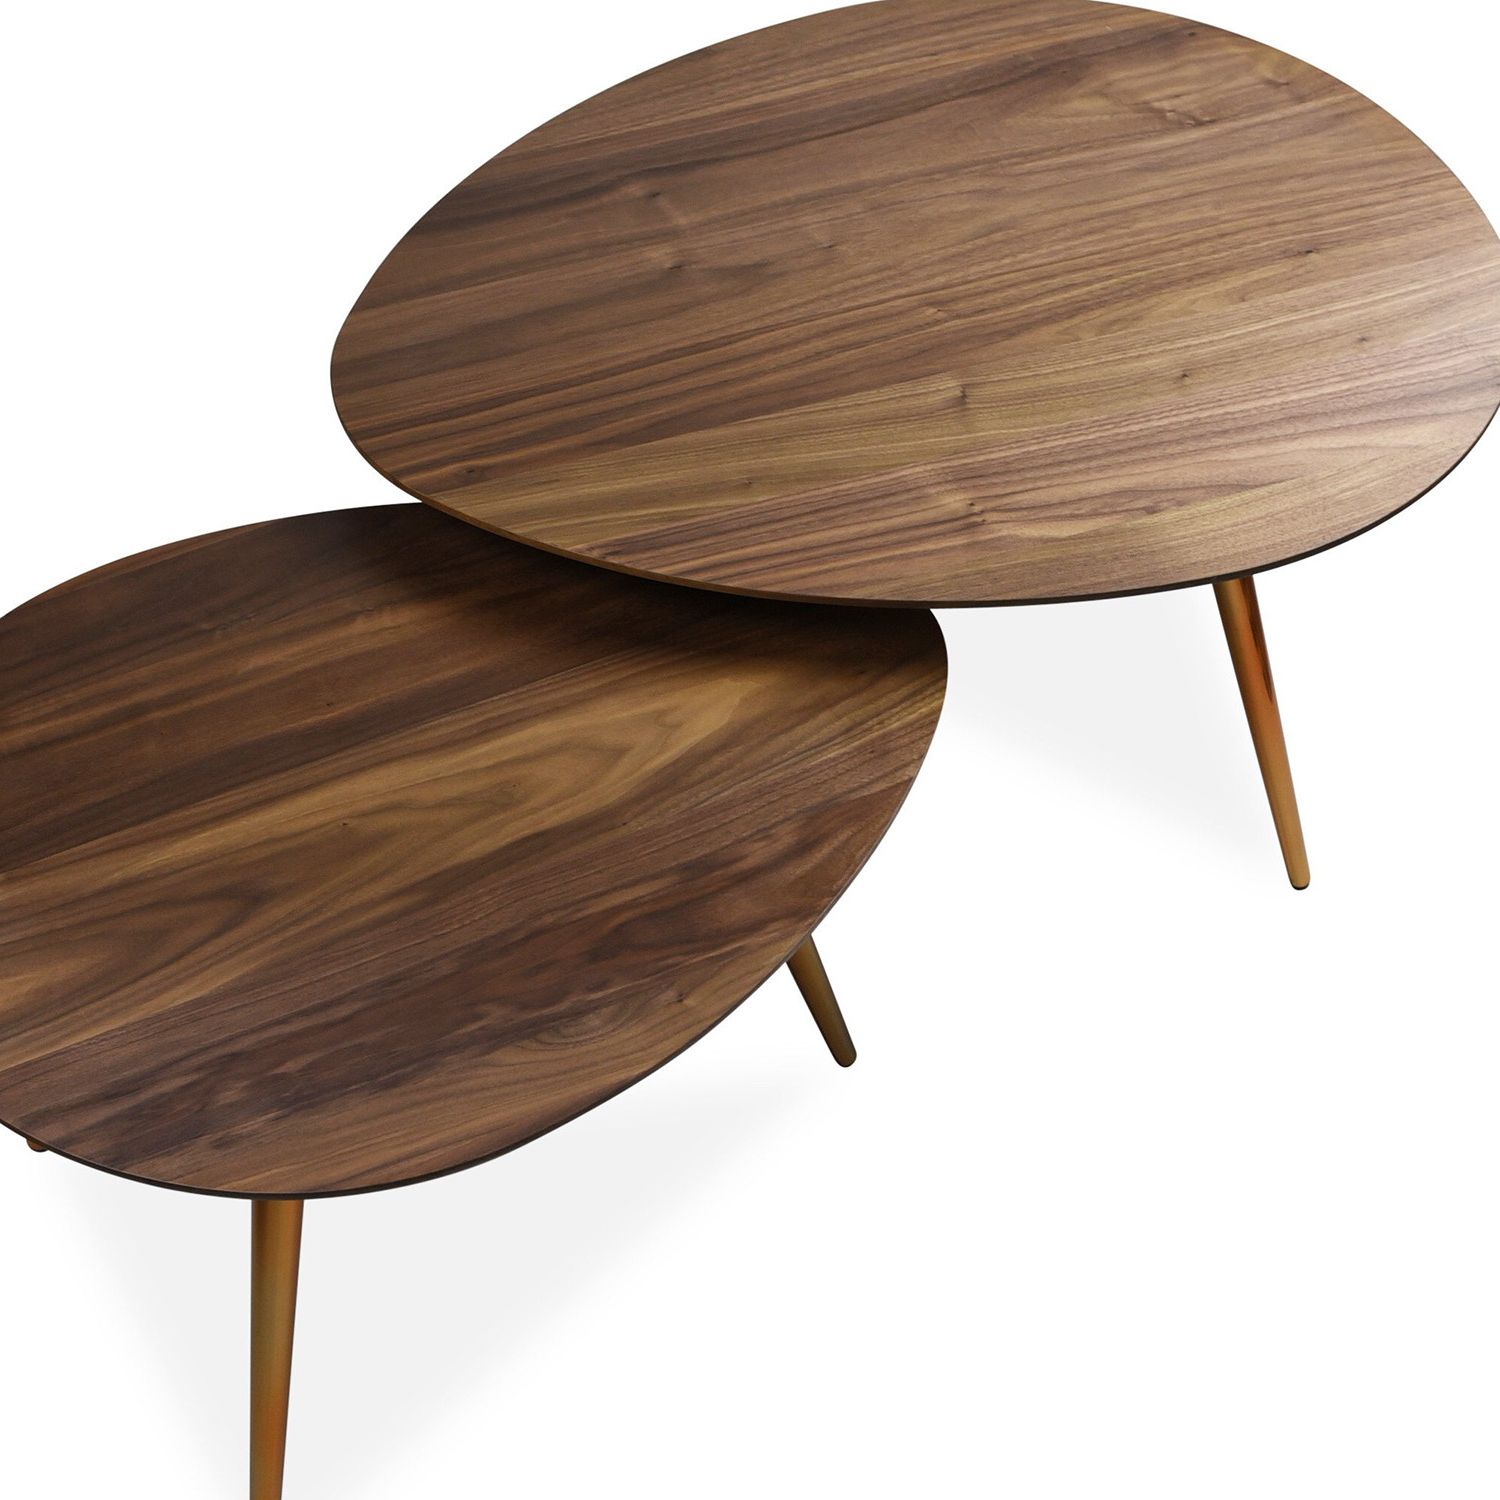 Trendy Maddox Mid Century Modern Nesting Coffee Table Set – Edloe Finch For Wooden Mid Century Coffee Tables (View 11 of 15)